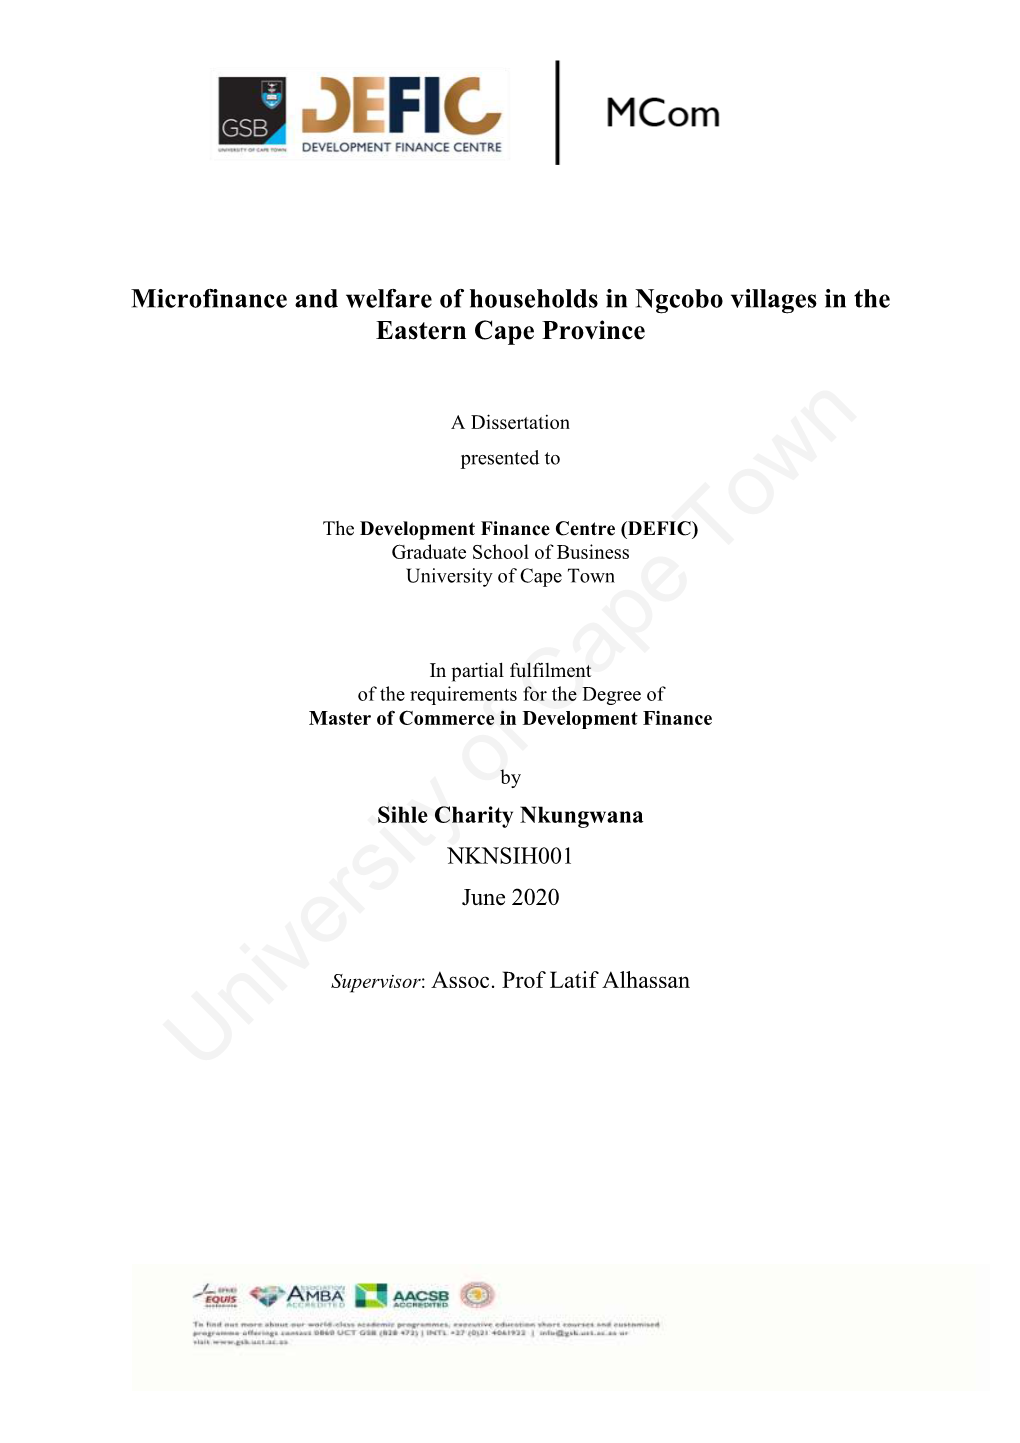 Microfinance and Welfare of Households in Ngcobo Villages in the Eastern Cape Province